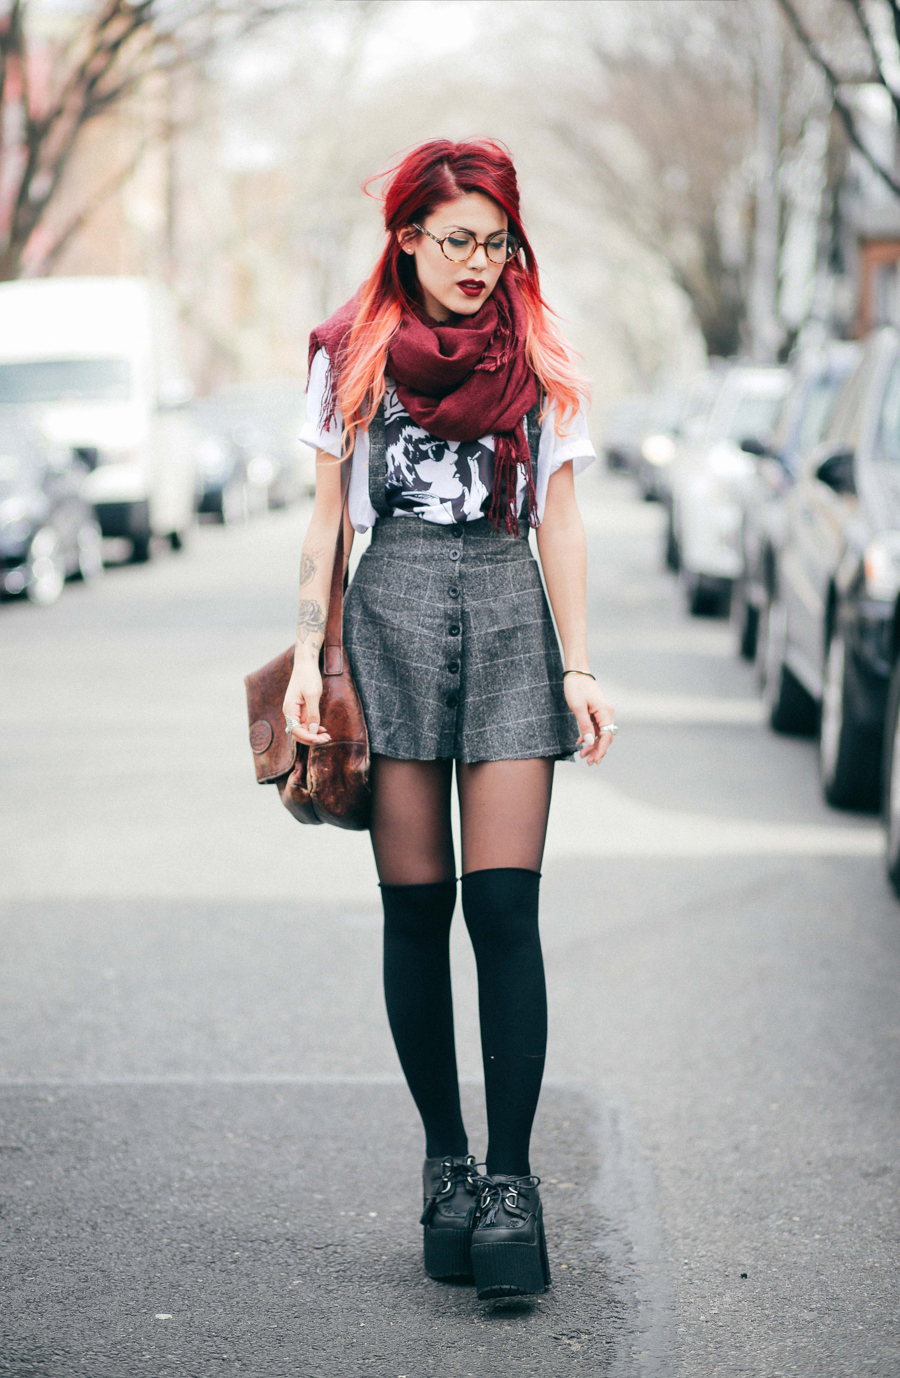 Le Happy wearing Sonic Youth tee and grey plaid skirt